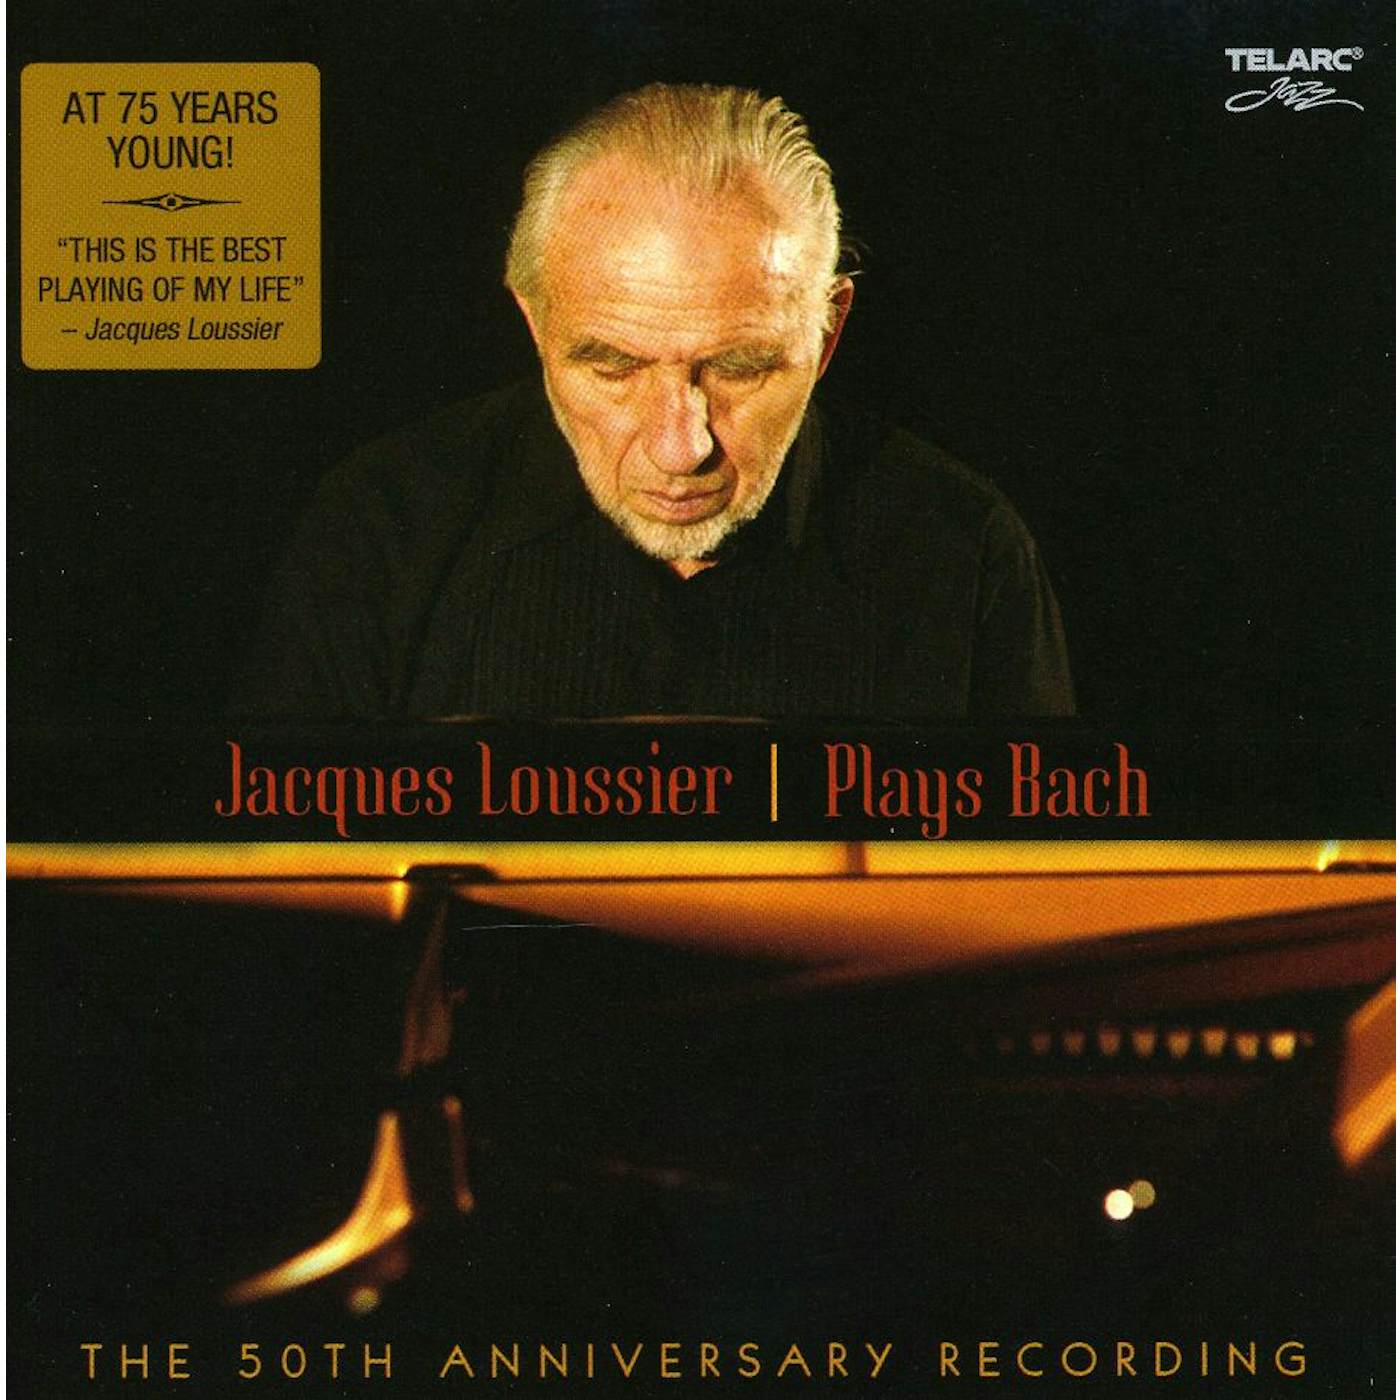 Jacques Loussier PLAYS BACH: THE 50TH ANNIVERSARY RECORDING CD